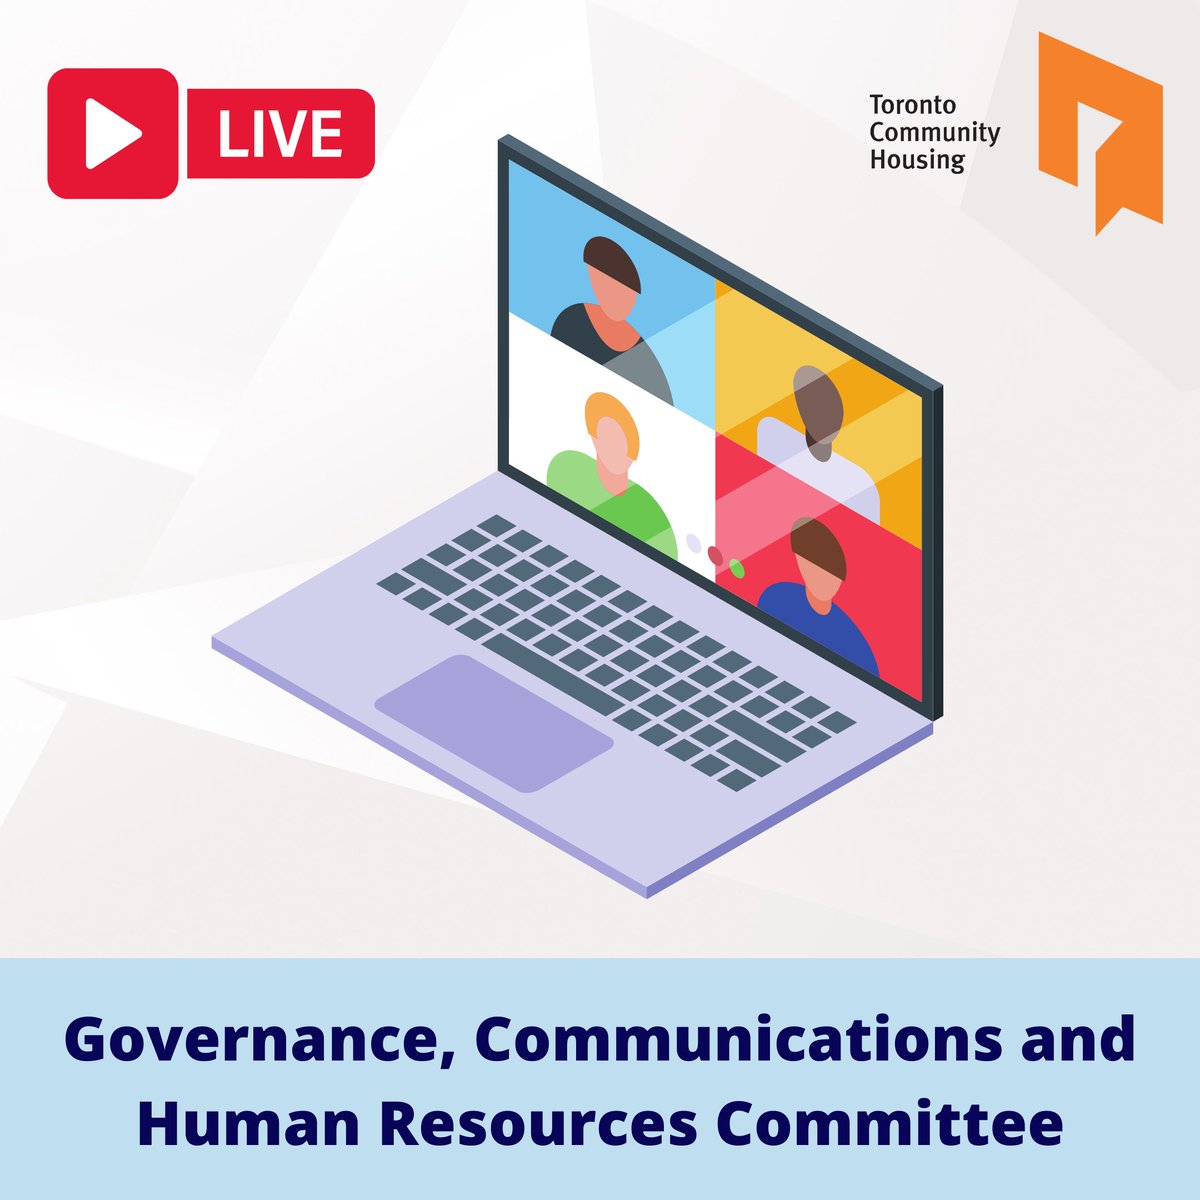 Reminder: You can watch this morning's meeting of the #TCHC Board's Governance, Communications and Human Resources Committee (GCHRC) live on YouTube: bit.ly/3QKf98V